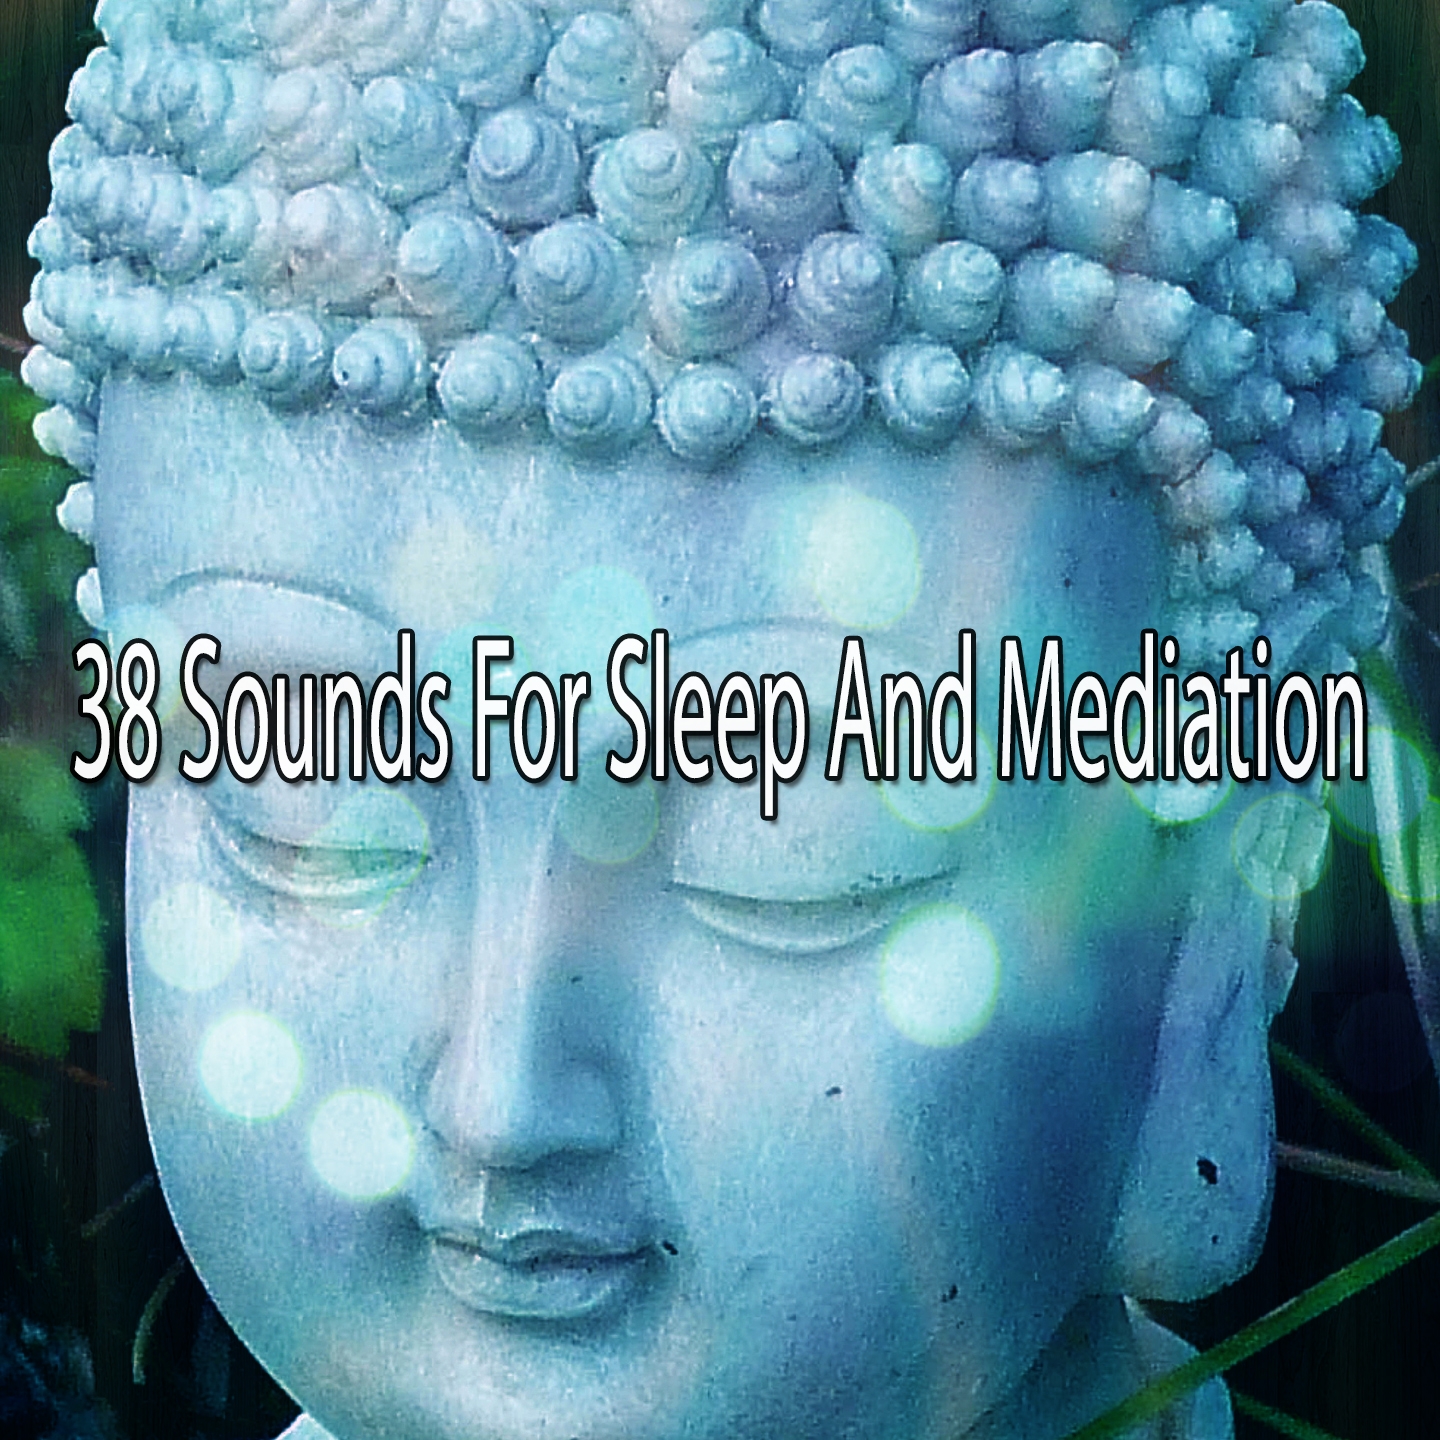 38 Sounds For Sleep And Mediation